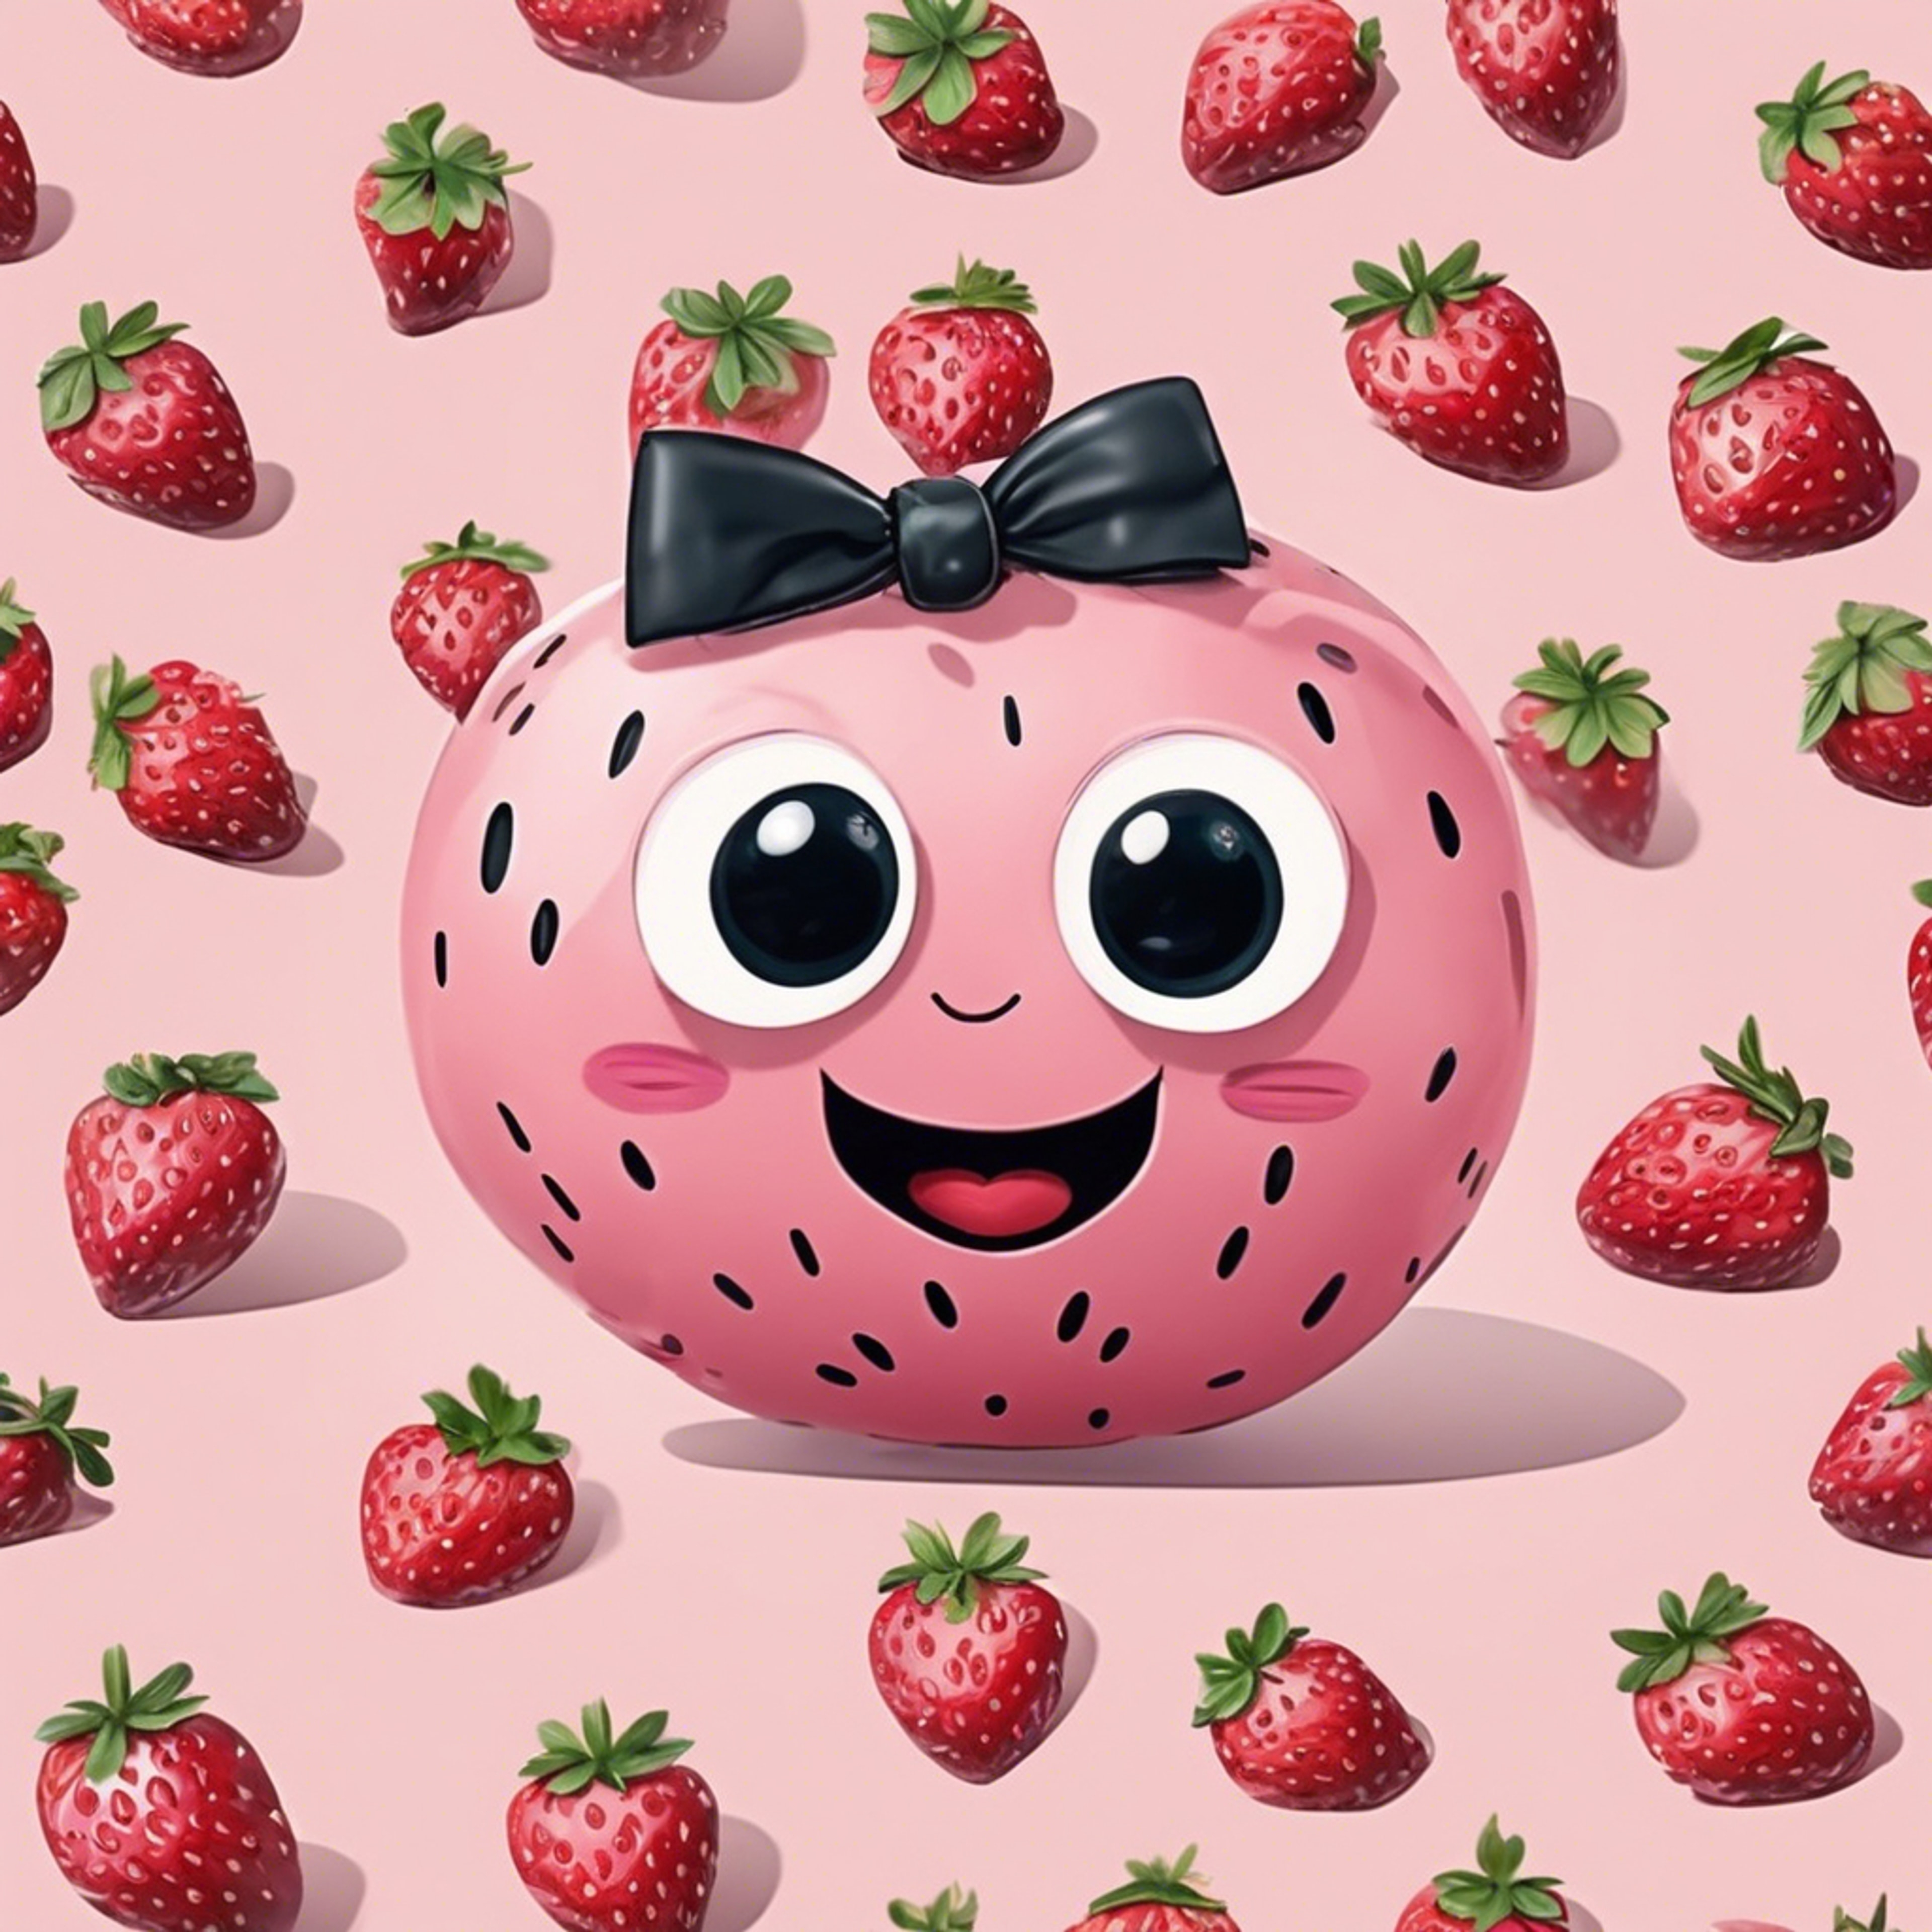 Cute, smiling light pink kawaii strawberries with big eyes and little bow ties. Fond d'écran[24a5e2efca874b08b7f4]